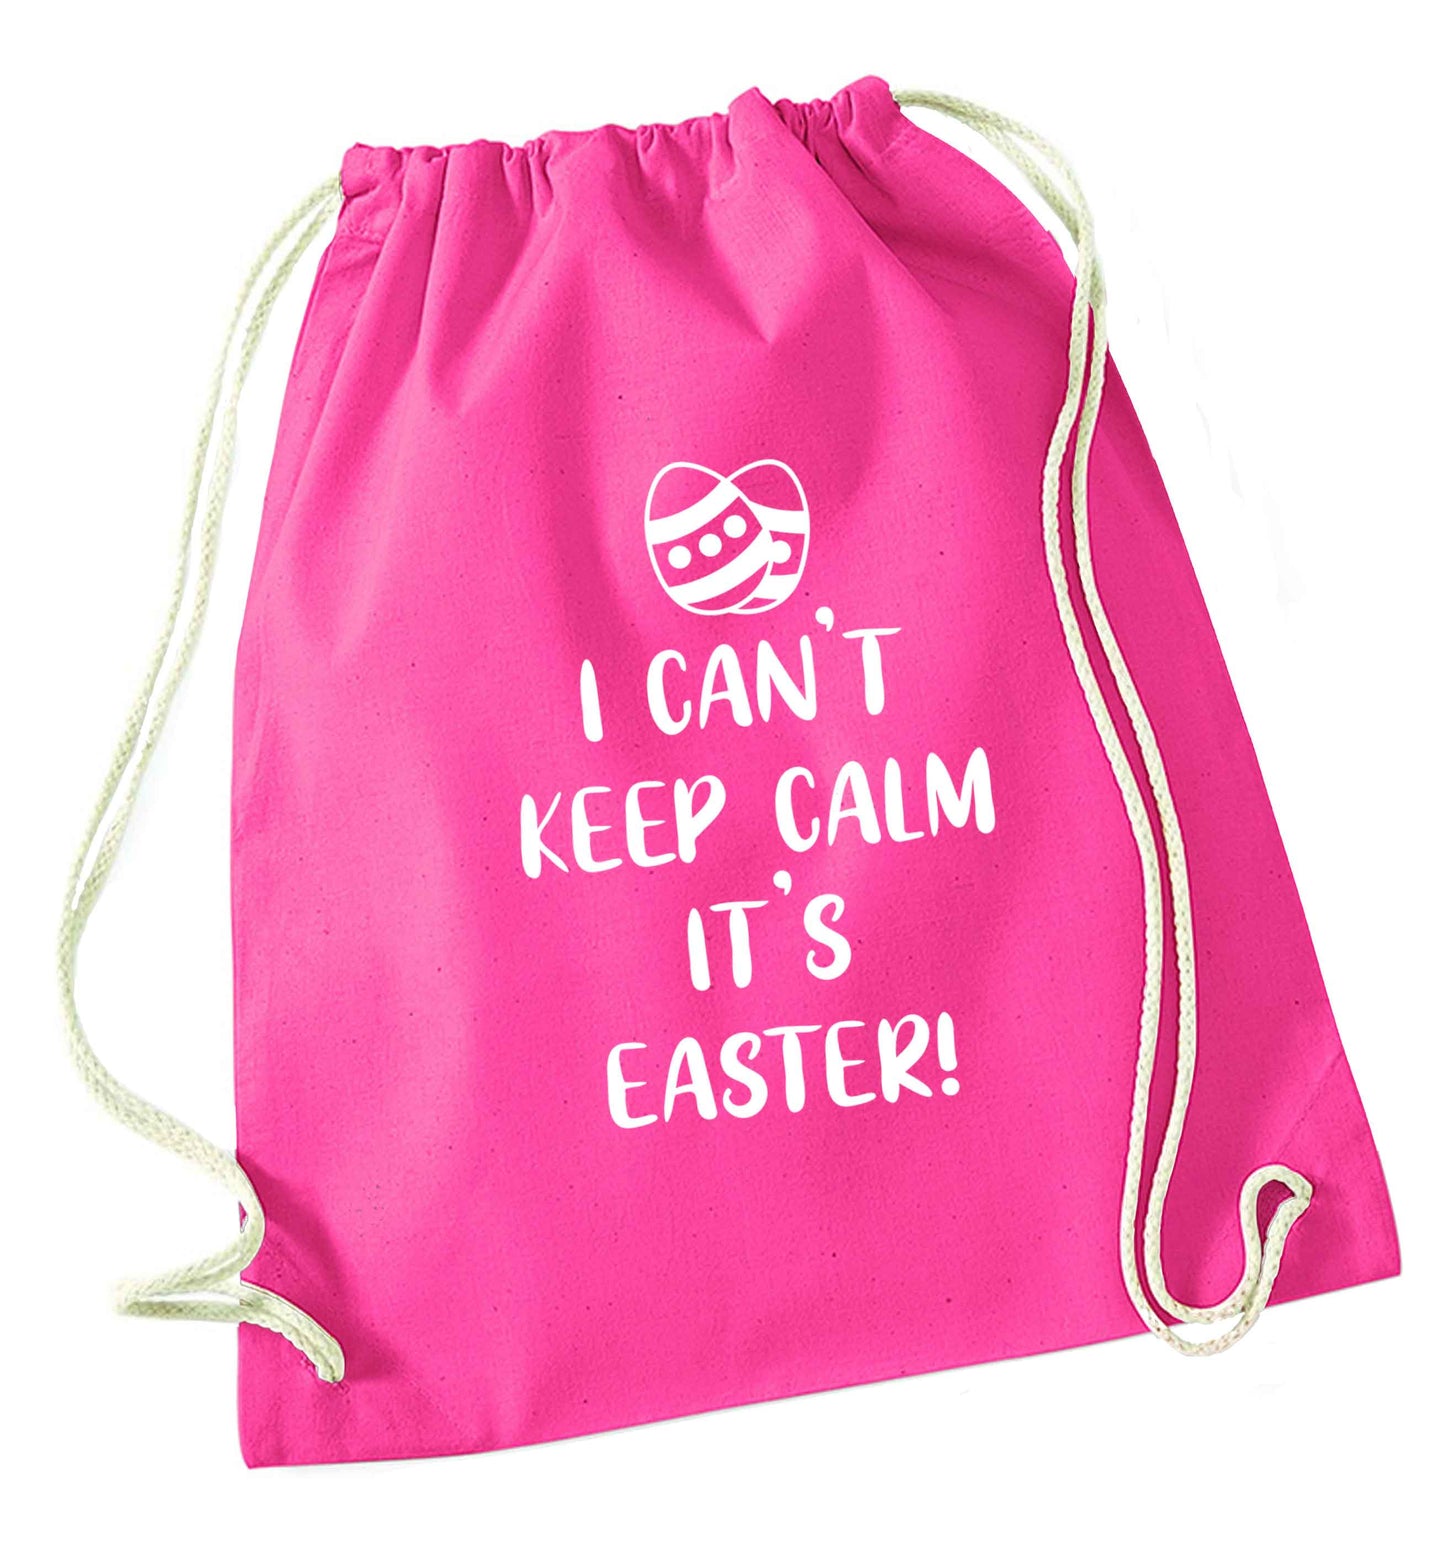 I can't keep calm it's Easter pink drawstring bag